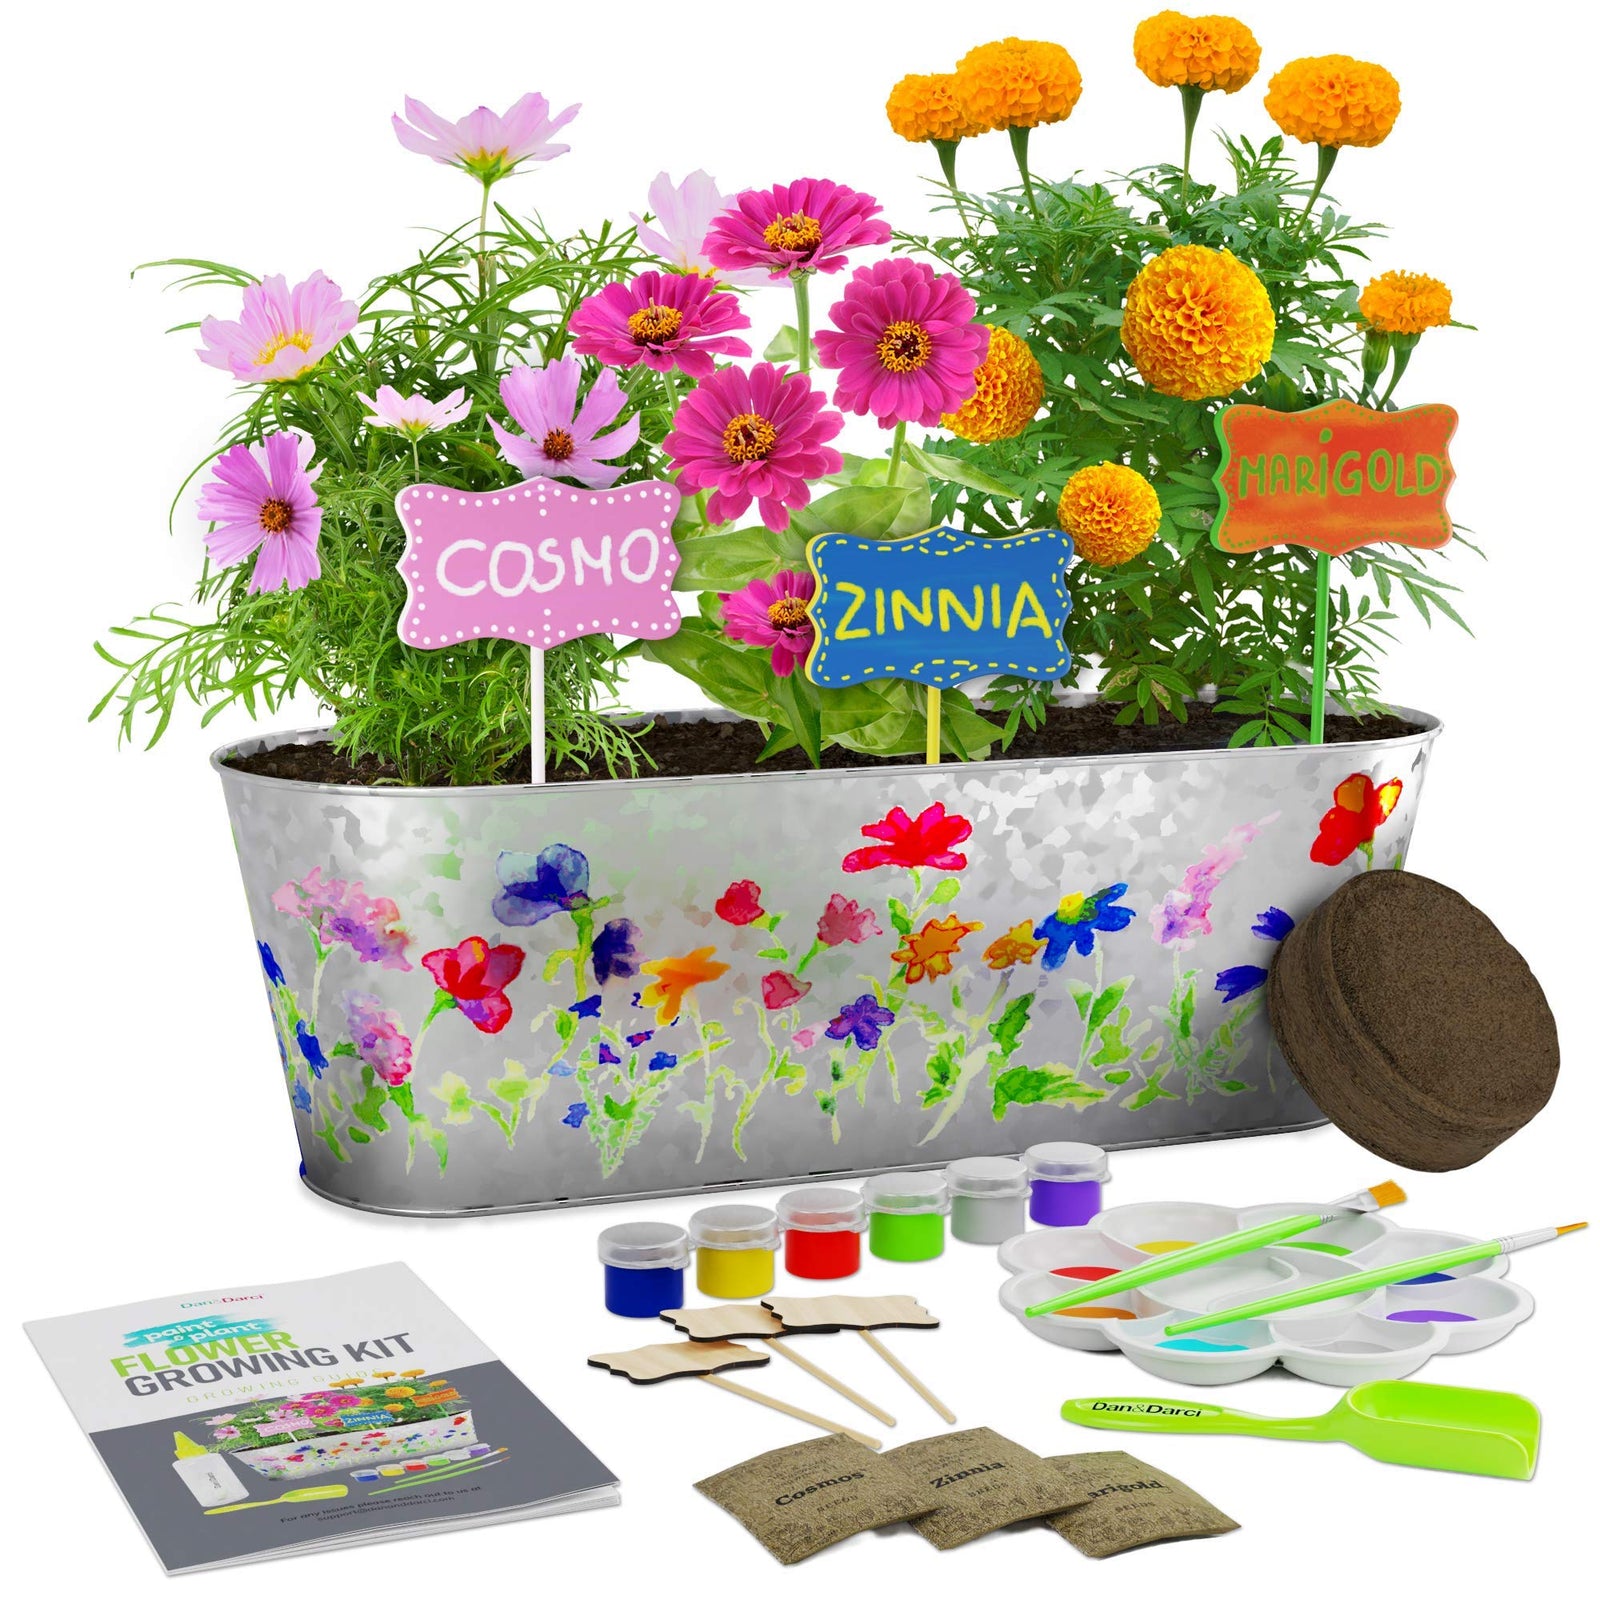 Paint & Plant Flower Growing Kit for Kids - Best Birthday Crafts Gifts for Girls & Boys Age 4, 5, 6, 7, 8-12 Year Old Girl Christmas Gift - Childrens Gardening Kits, Art Projects Toys for Ages 4-12